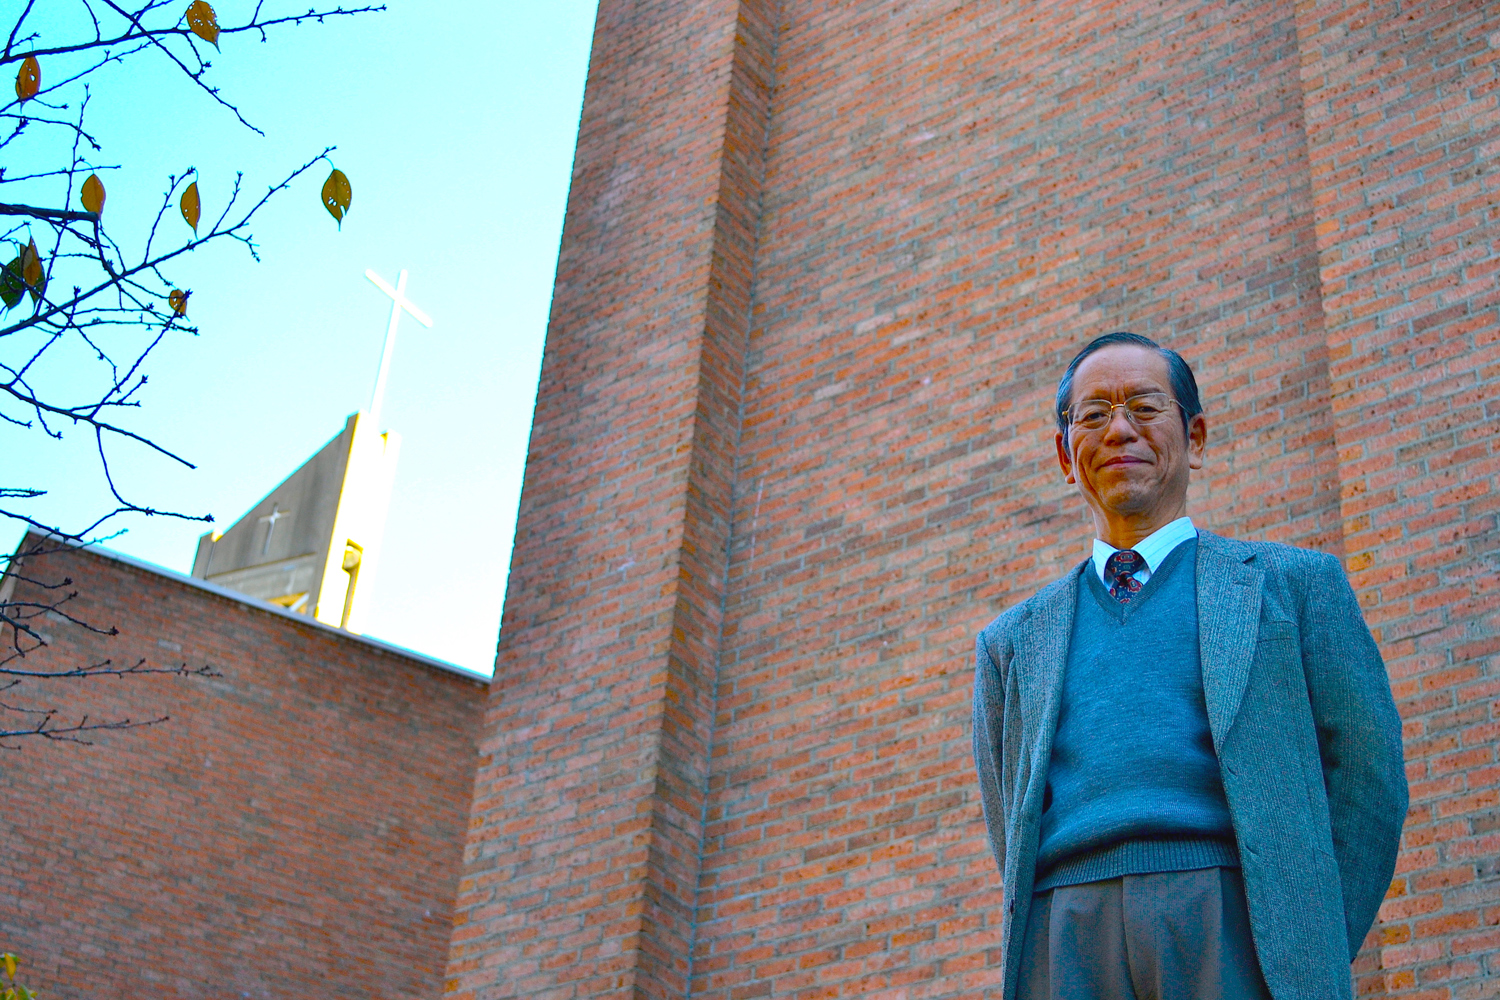 Reverend Kazuo Yoshimura with his gently, unfailing smile.